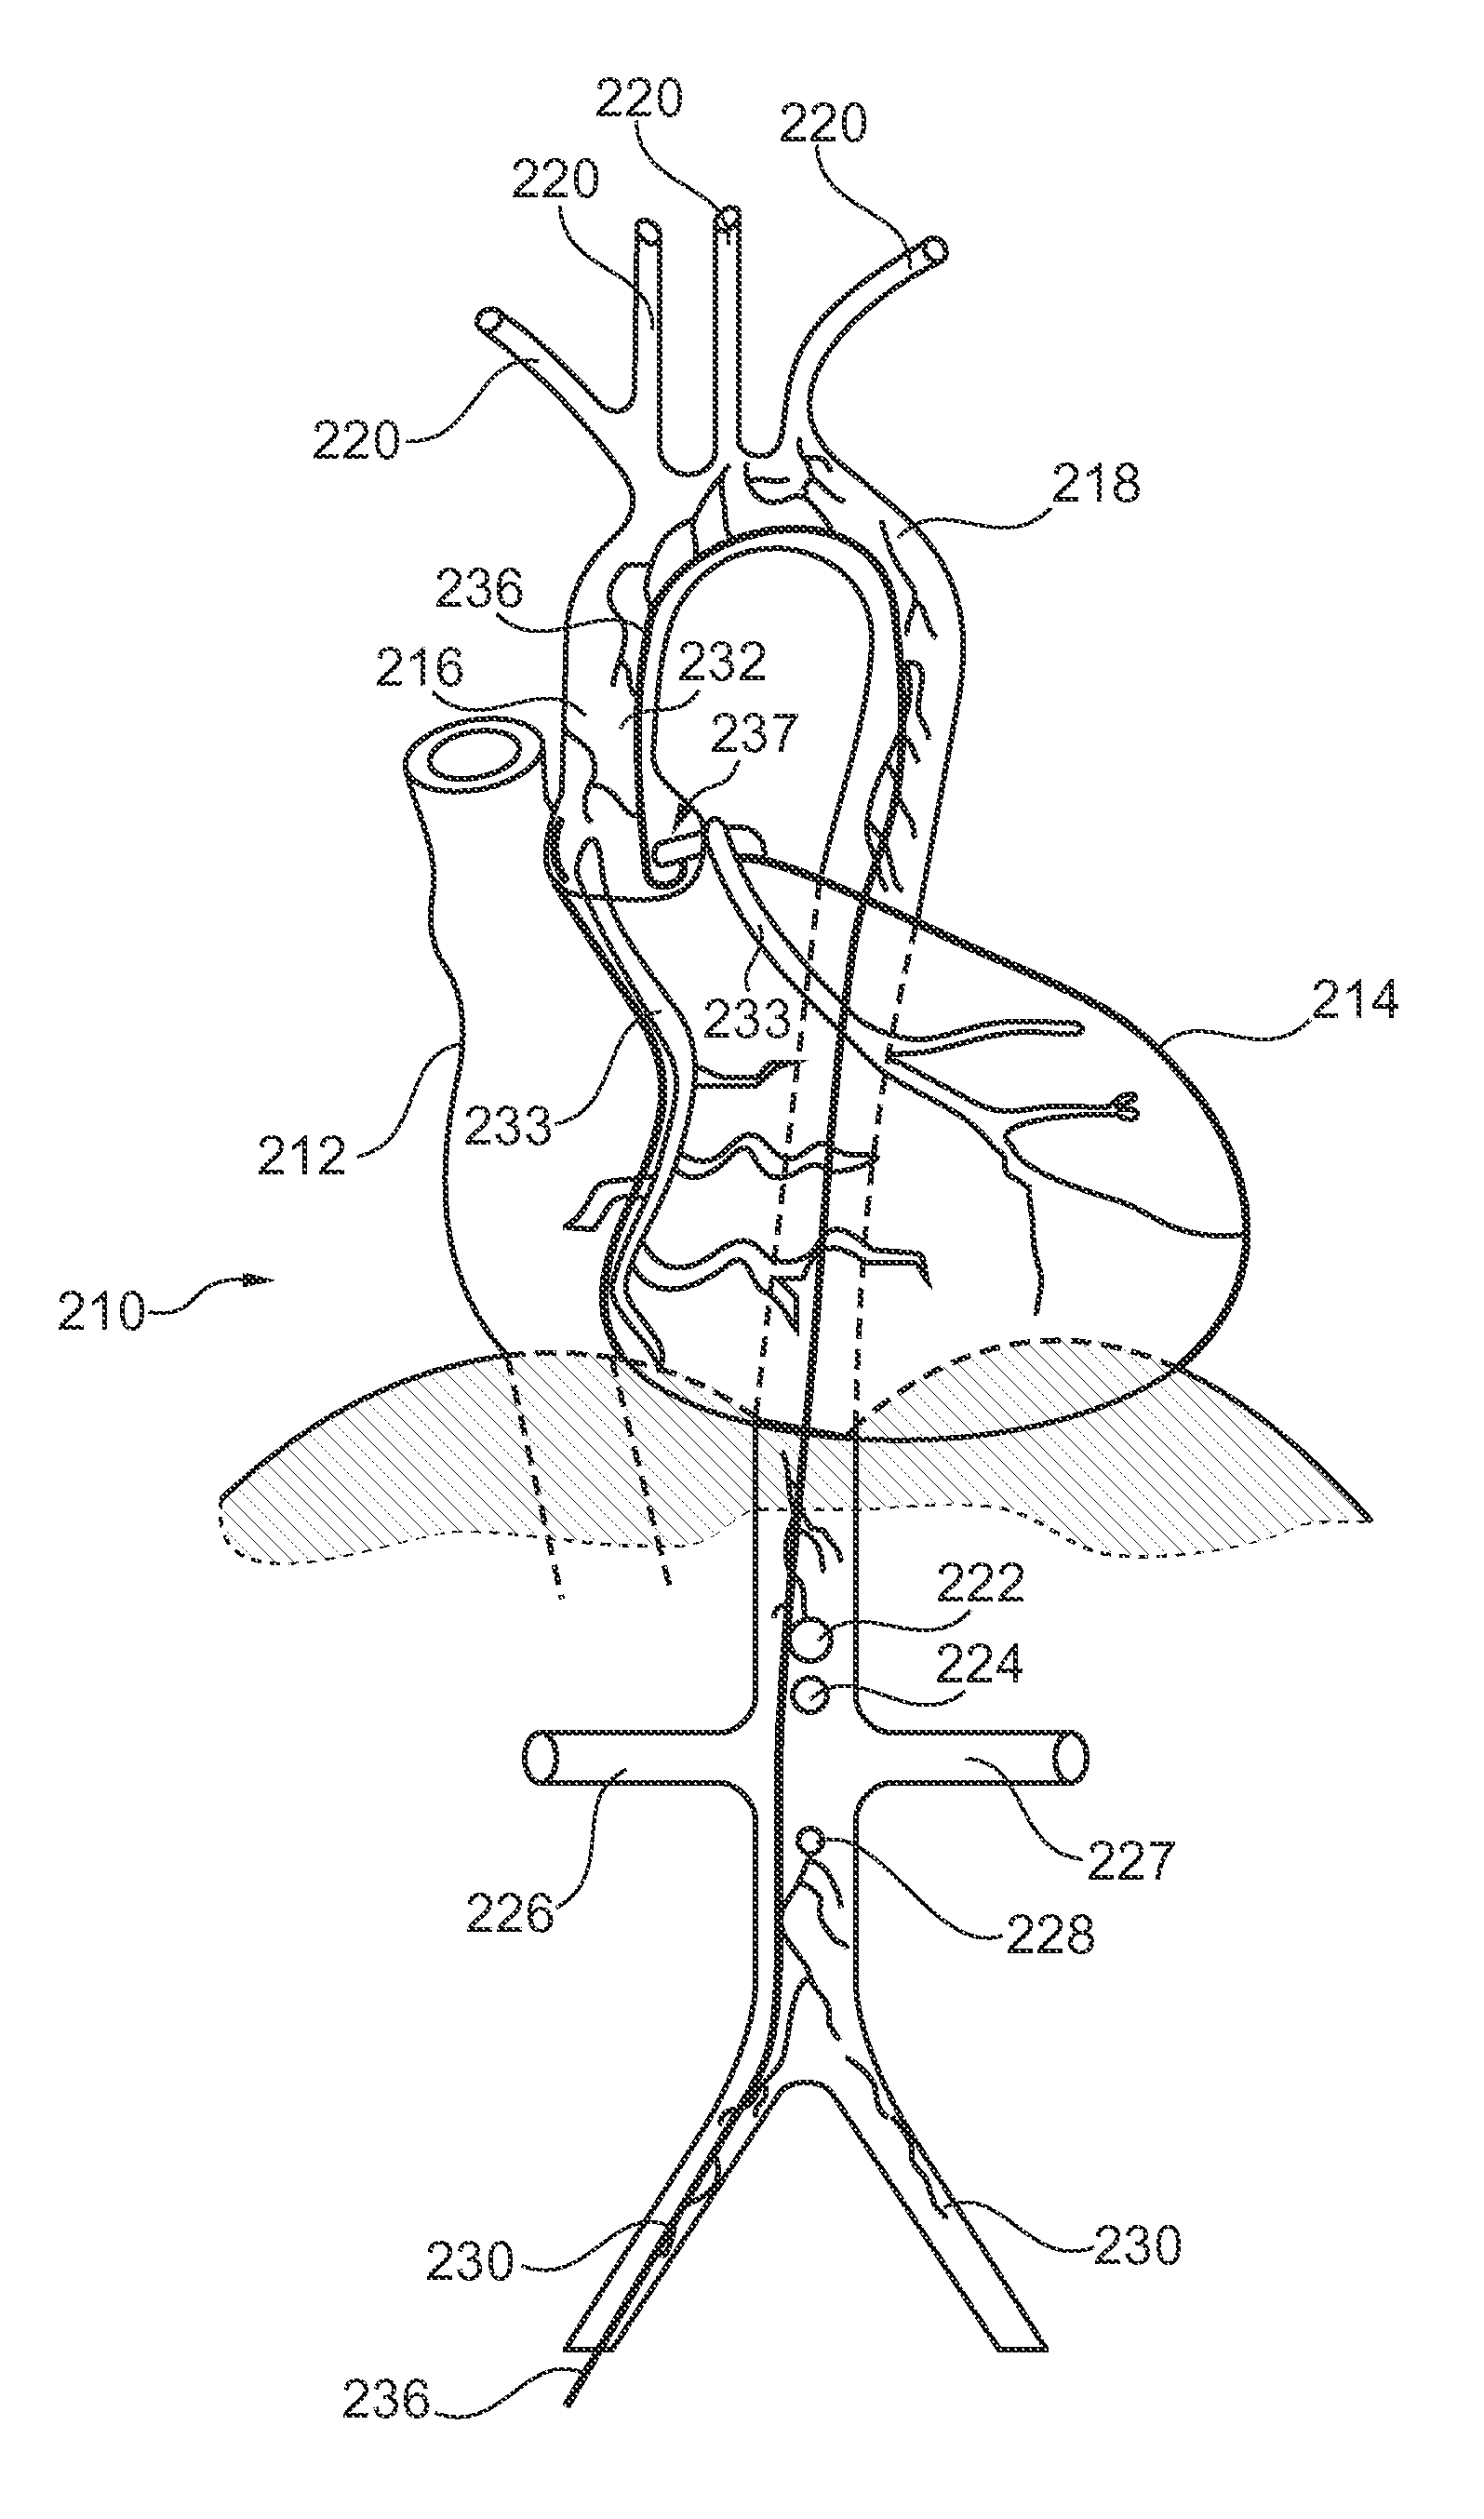 Image representation supporting the accurate positioning of an intervention device in vessel intervention procedures